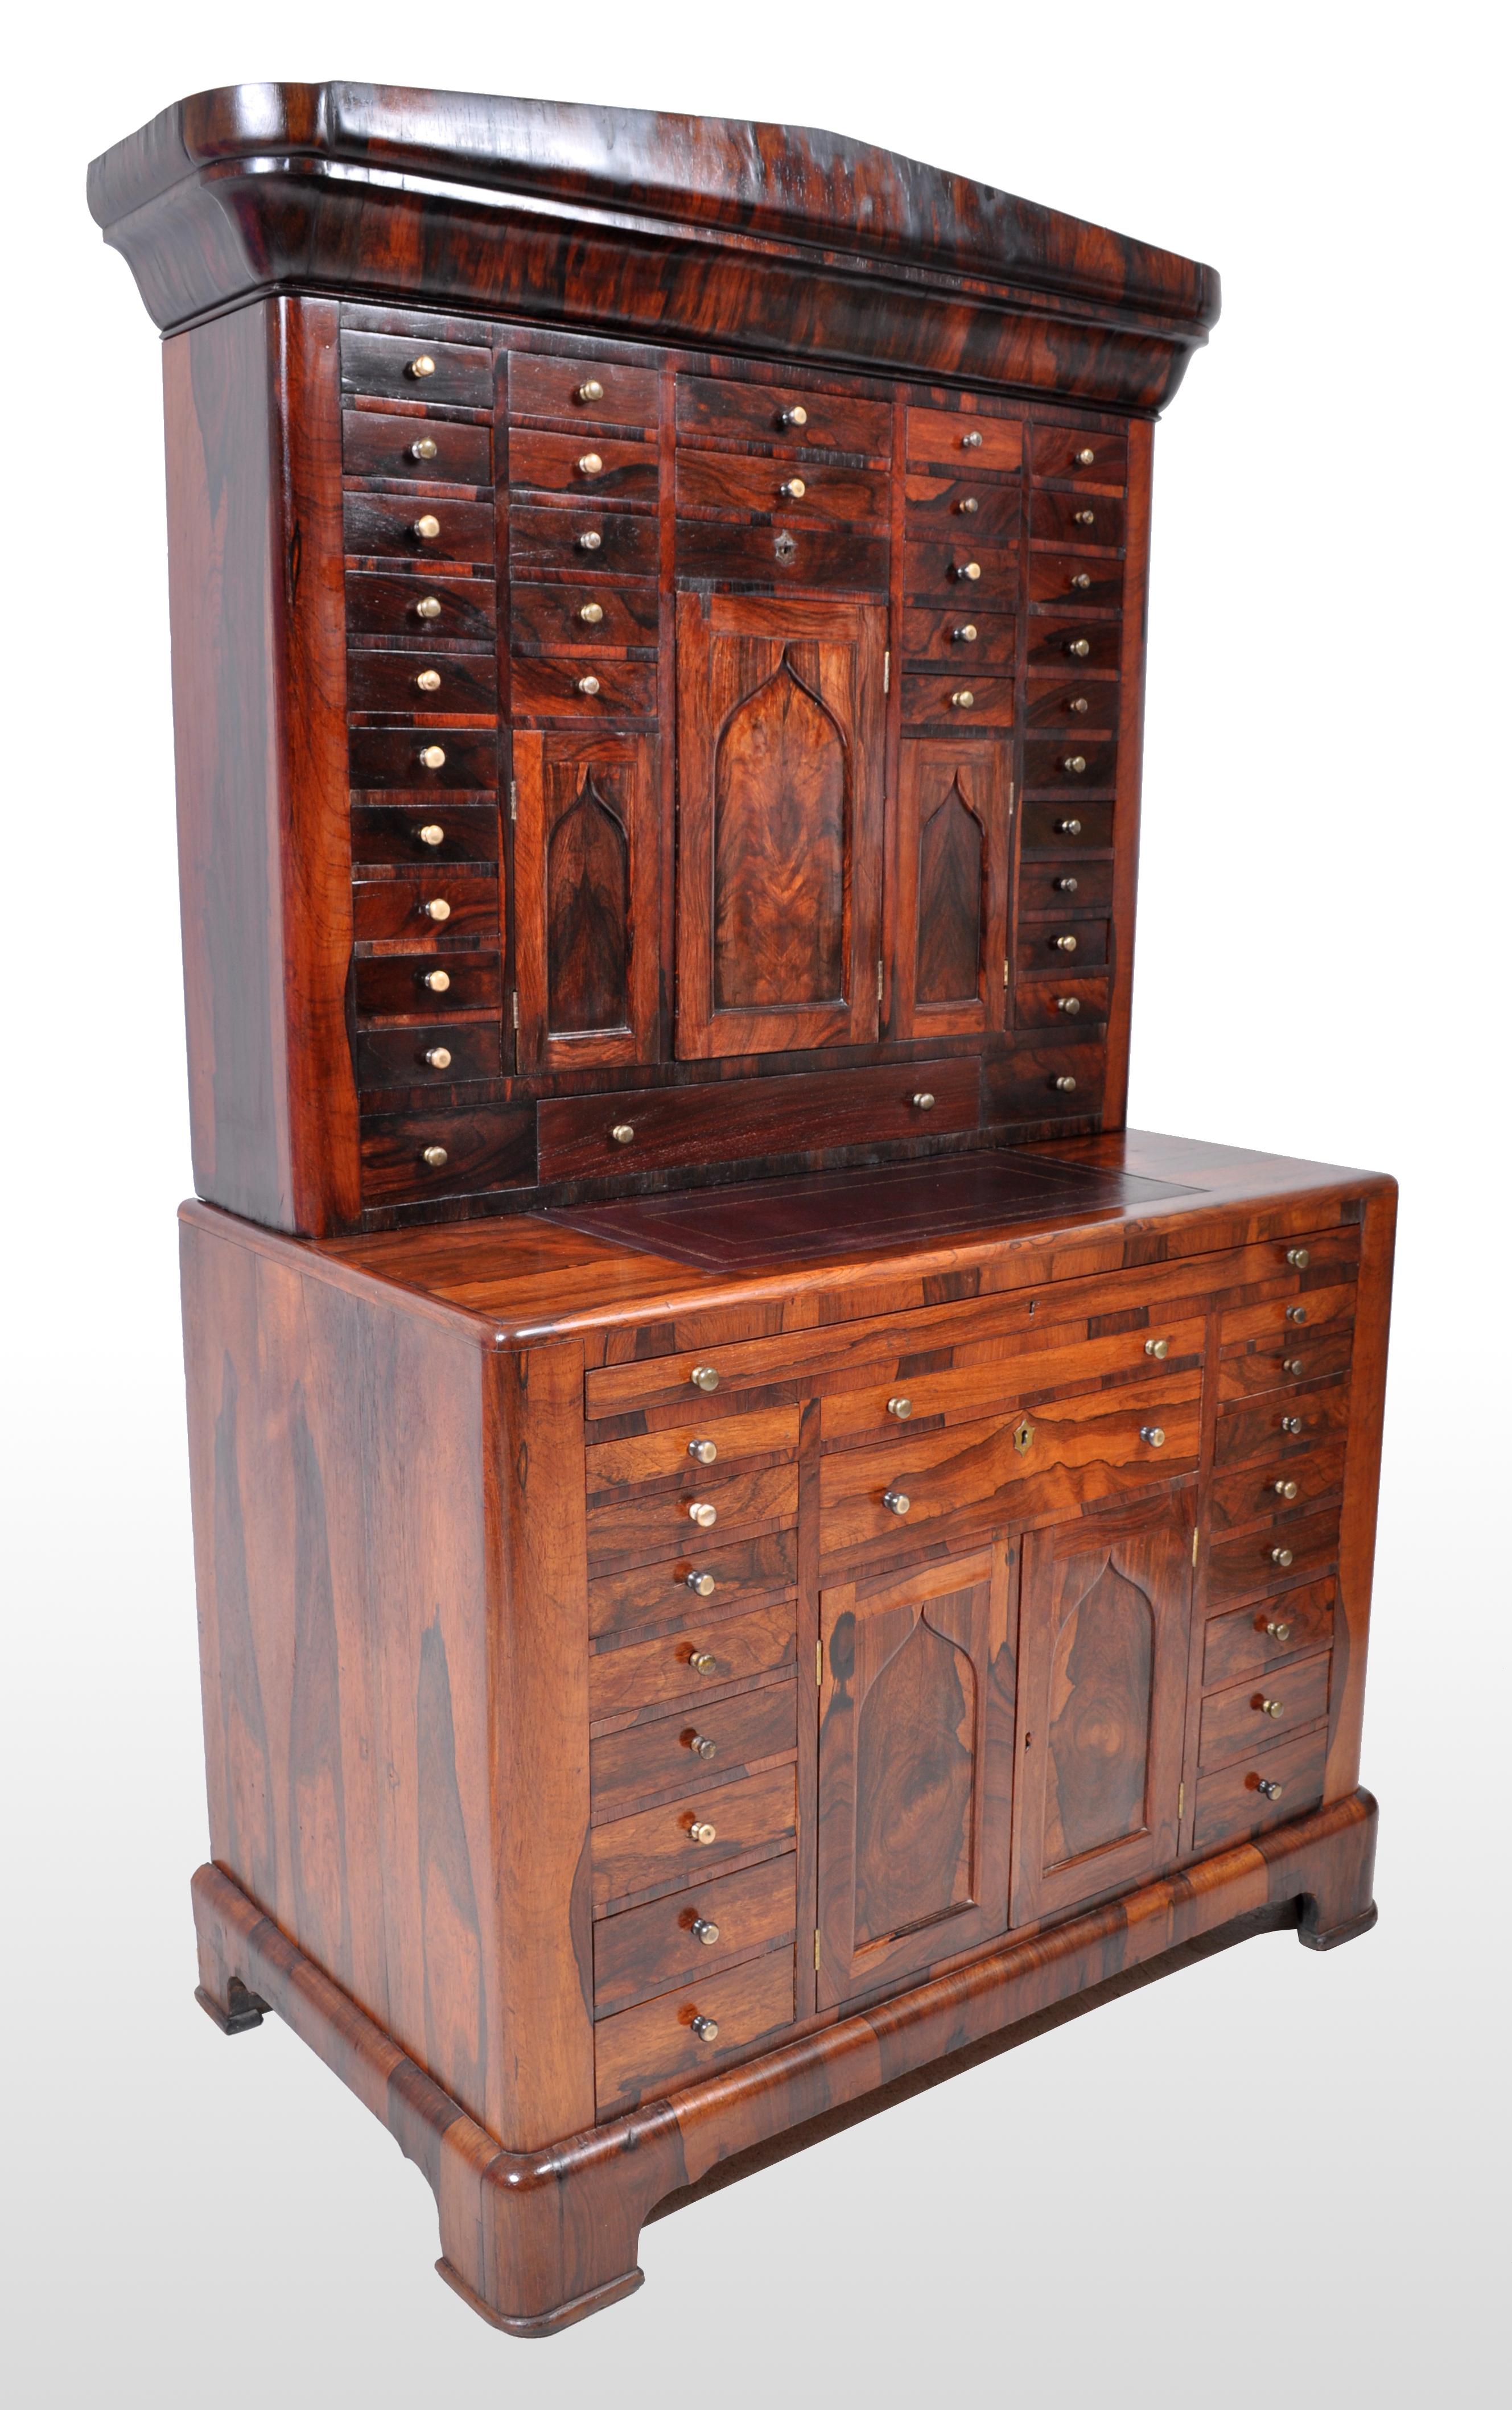 Antique American Empire rosewood dental / medical cabinet, circa 1820. This incredibly rare cabinet, in two section, made of figured rosewood throughout and having a neoclassical pediment to the top. Below the pediment is a cabinet with 34 drawers